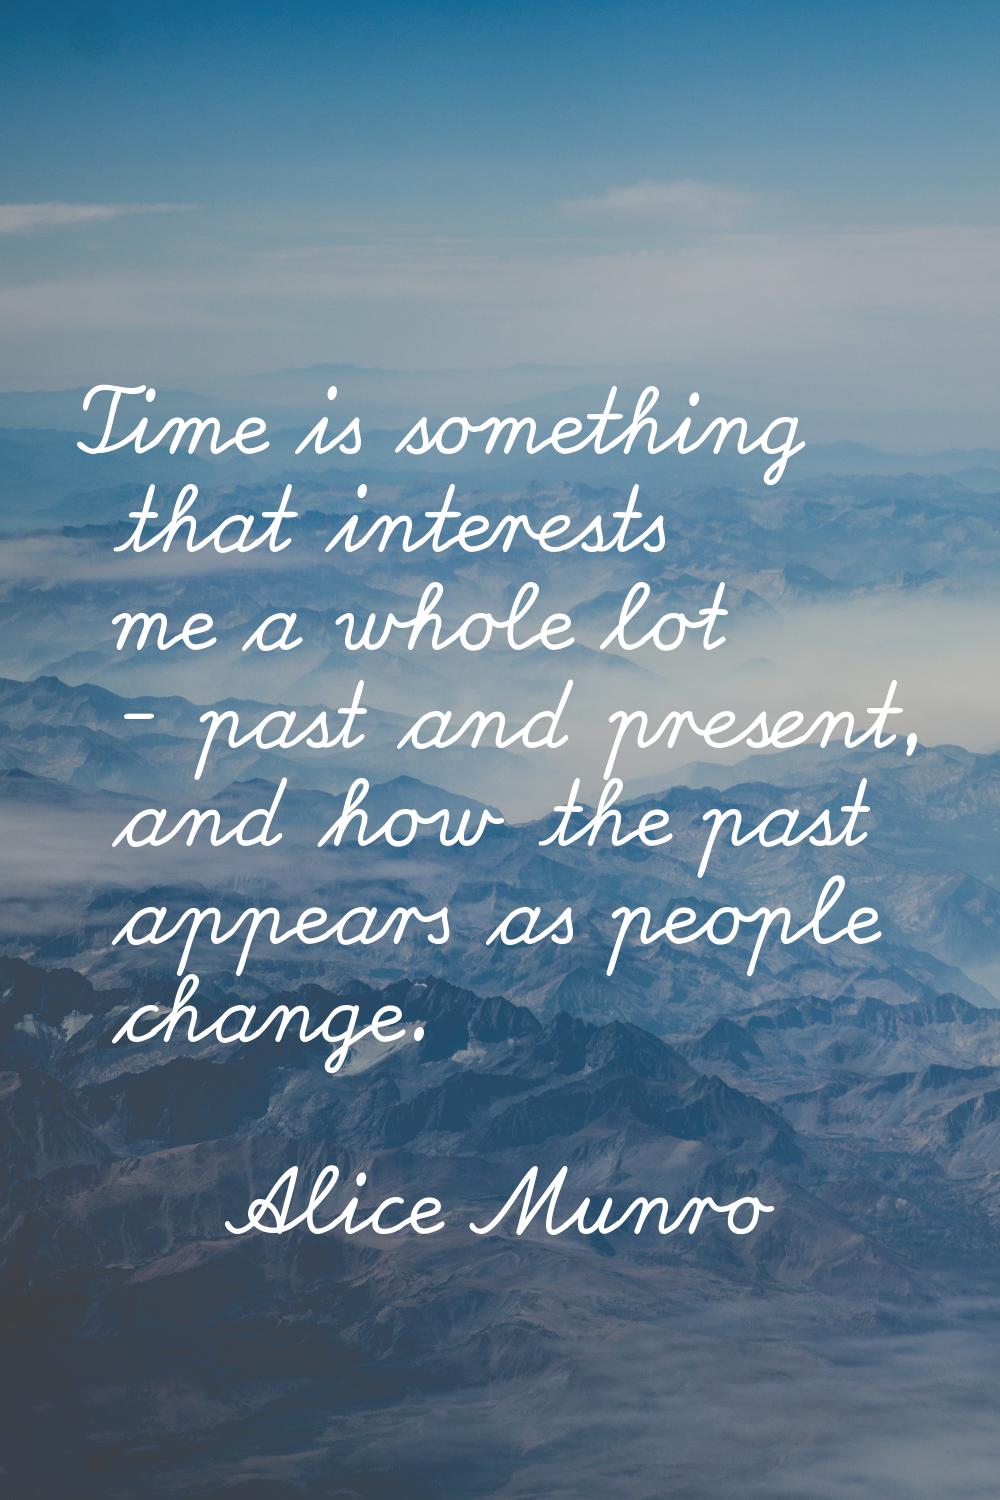 Time is something that interests me a whole lot - past and present, and how the past appears as peo